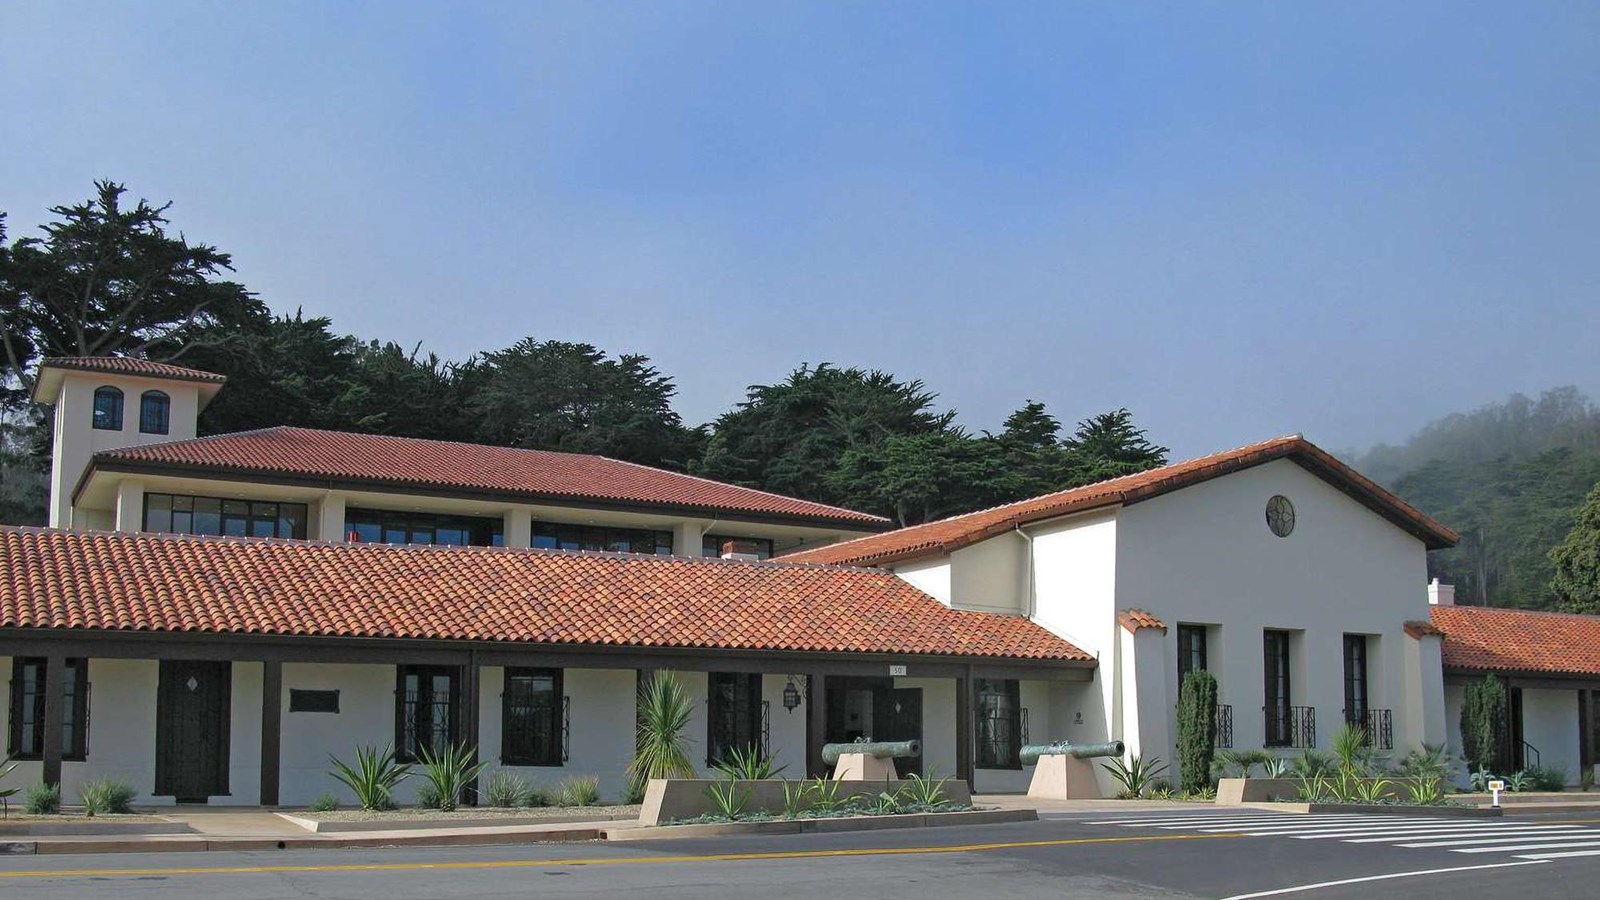 View of the white stucco, red roofed Presidio Officers\' Club as it looks today.